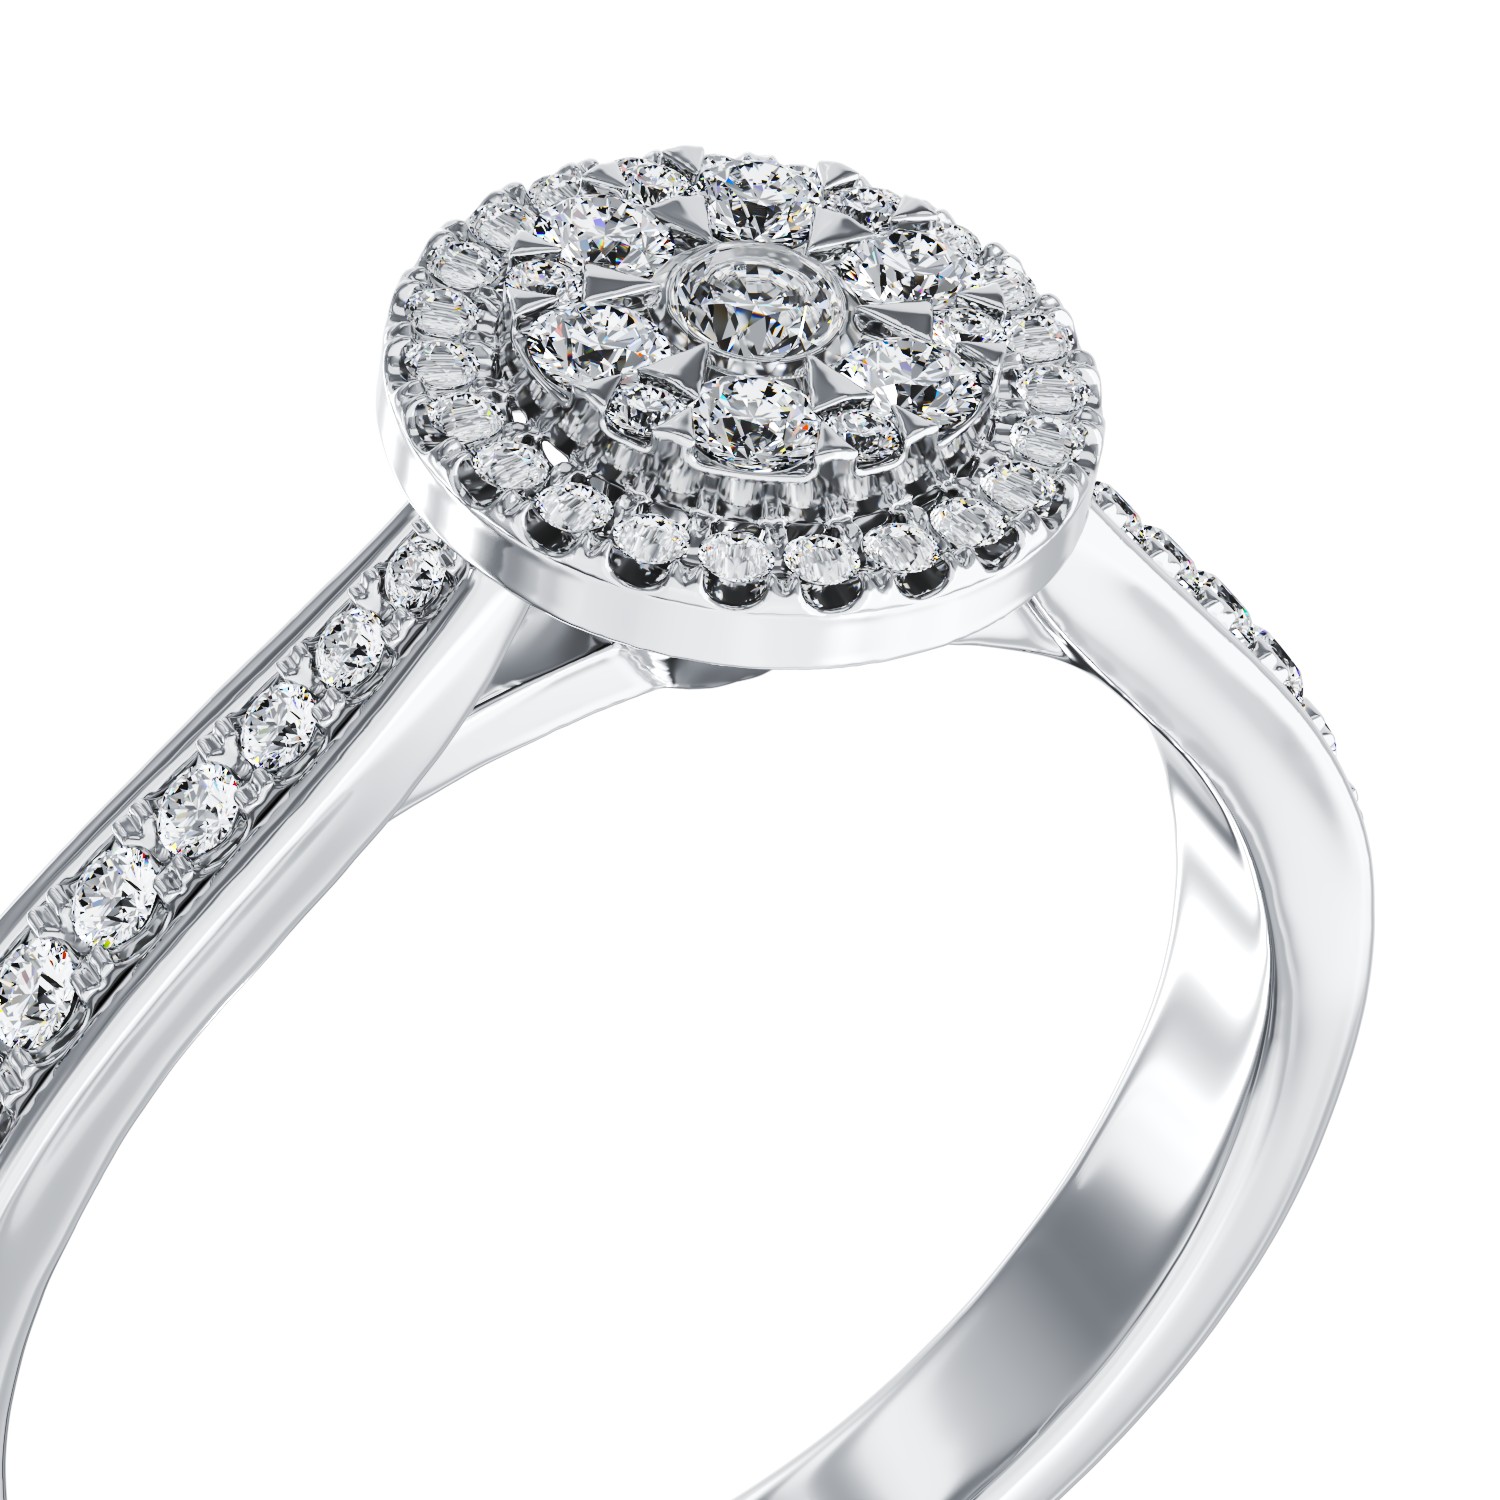 18K white gold engagement ring with 0.434ct diamonds